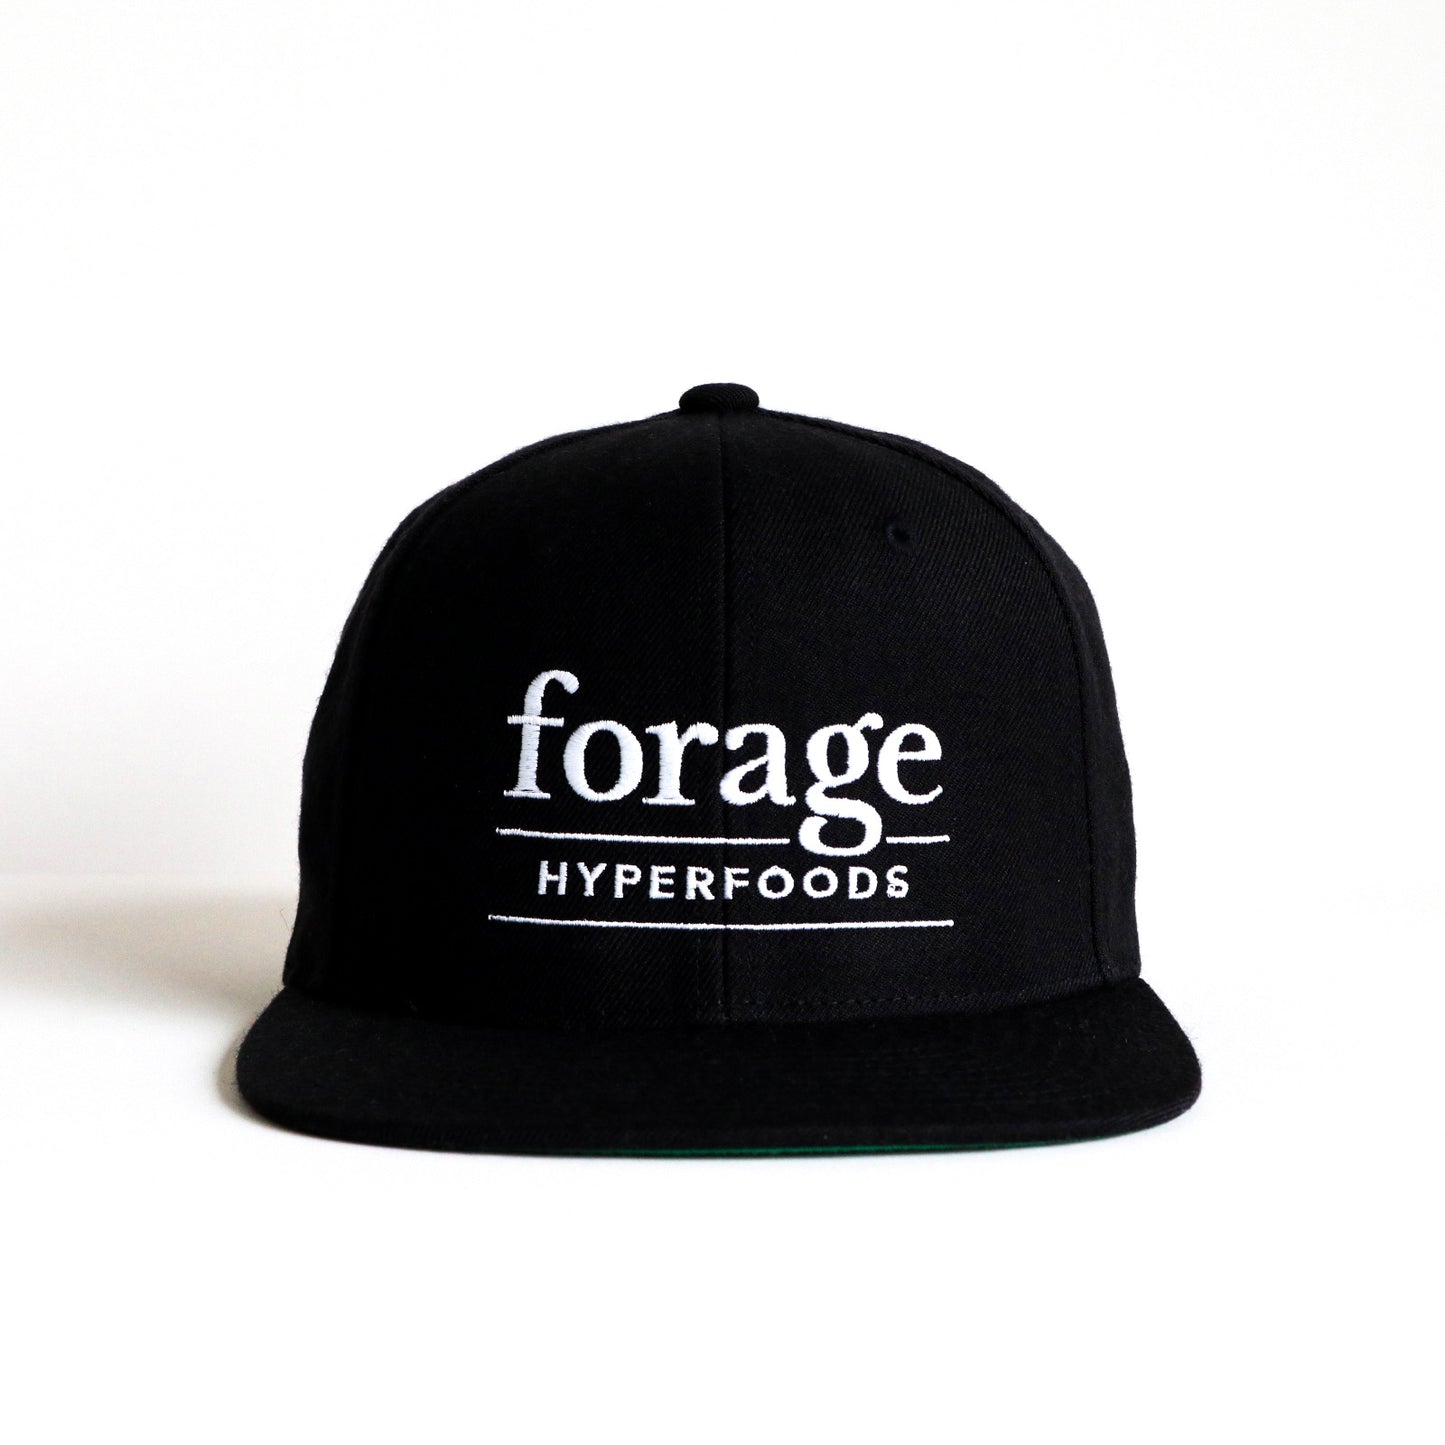 A black snapback hat with white "forage hyperfoods" embroidered on the front. It sits facing the camera. 